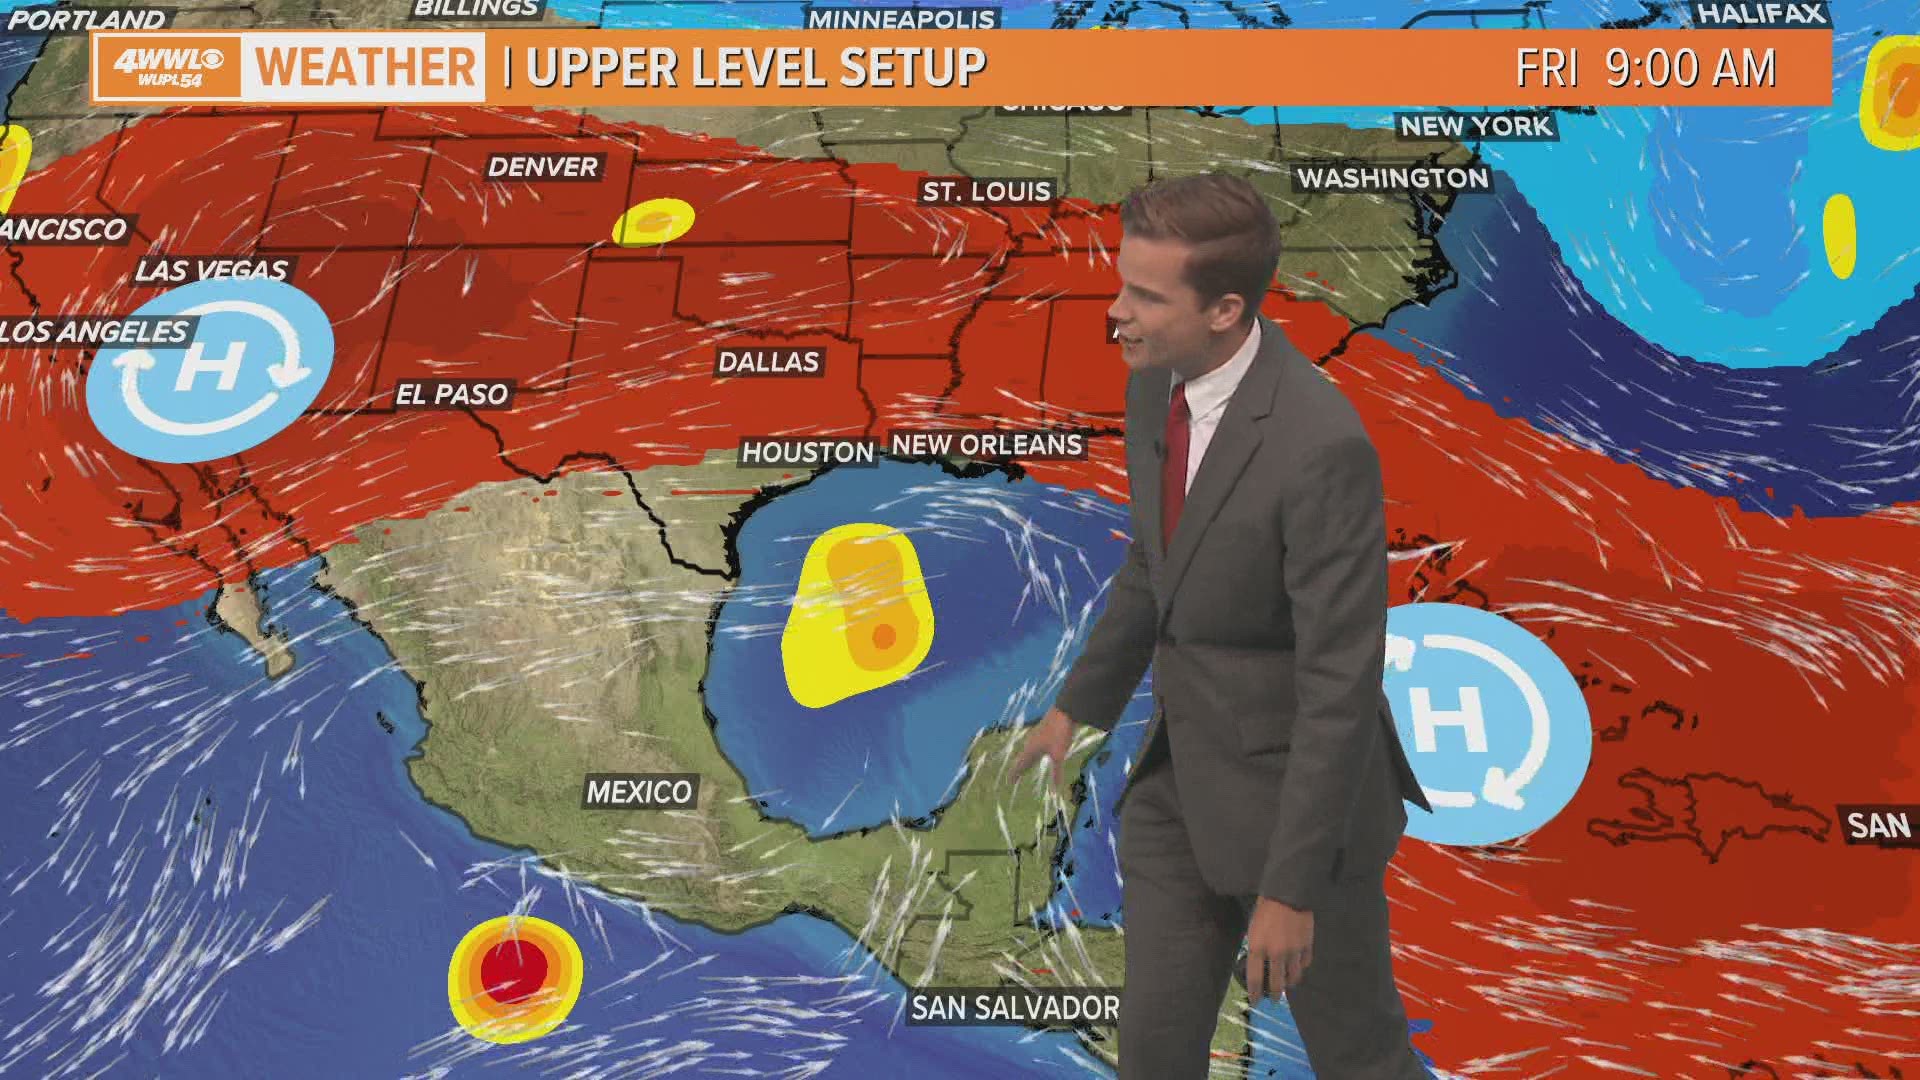 Your Monday Forecast: Dangerously hot and humid, some development in the Gulf